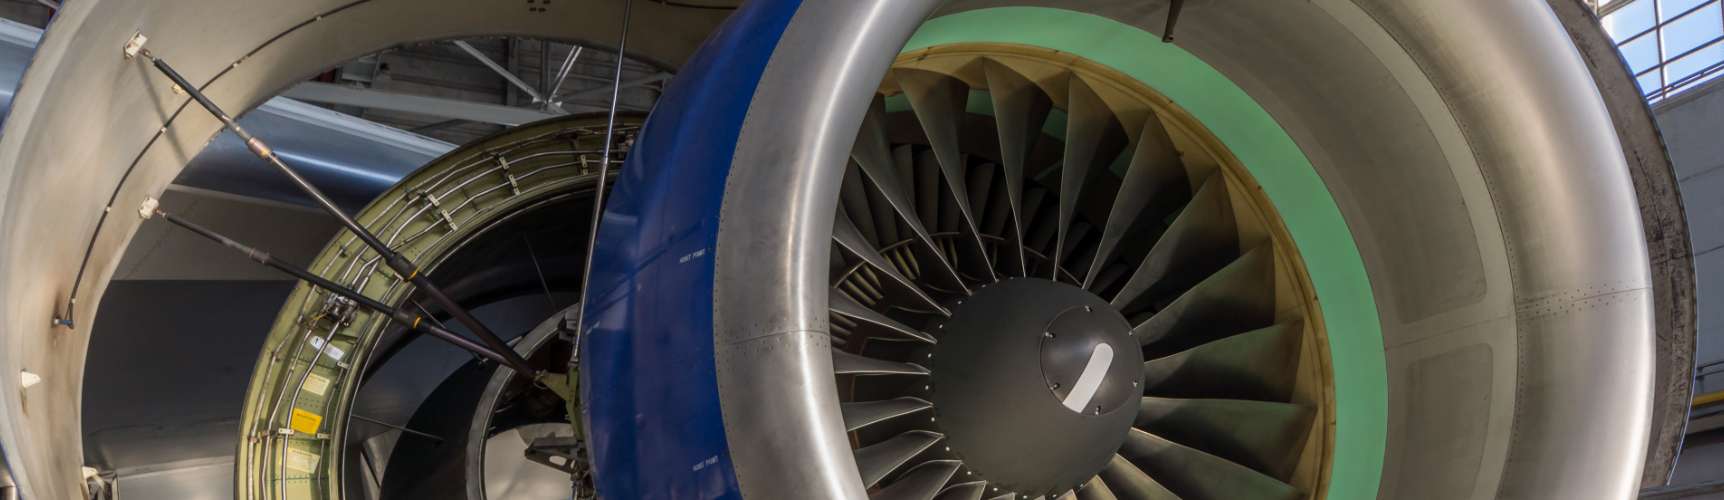 MRO support using Predictive Analytics for Intelligent decision making